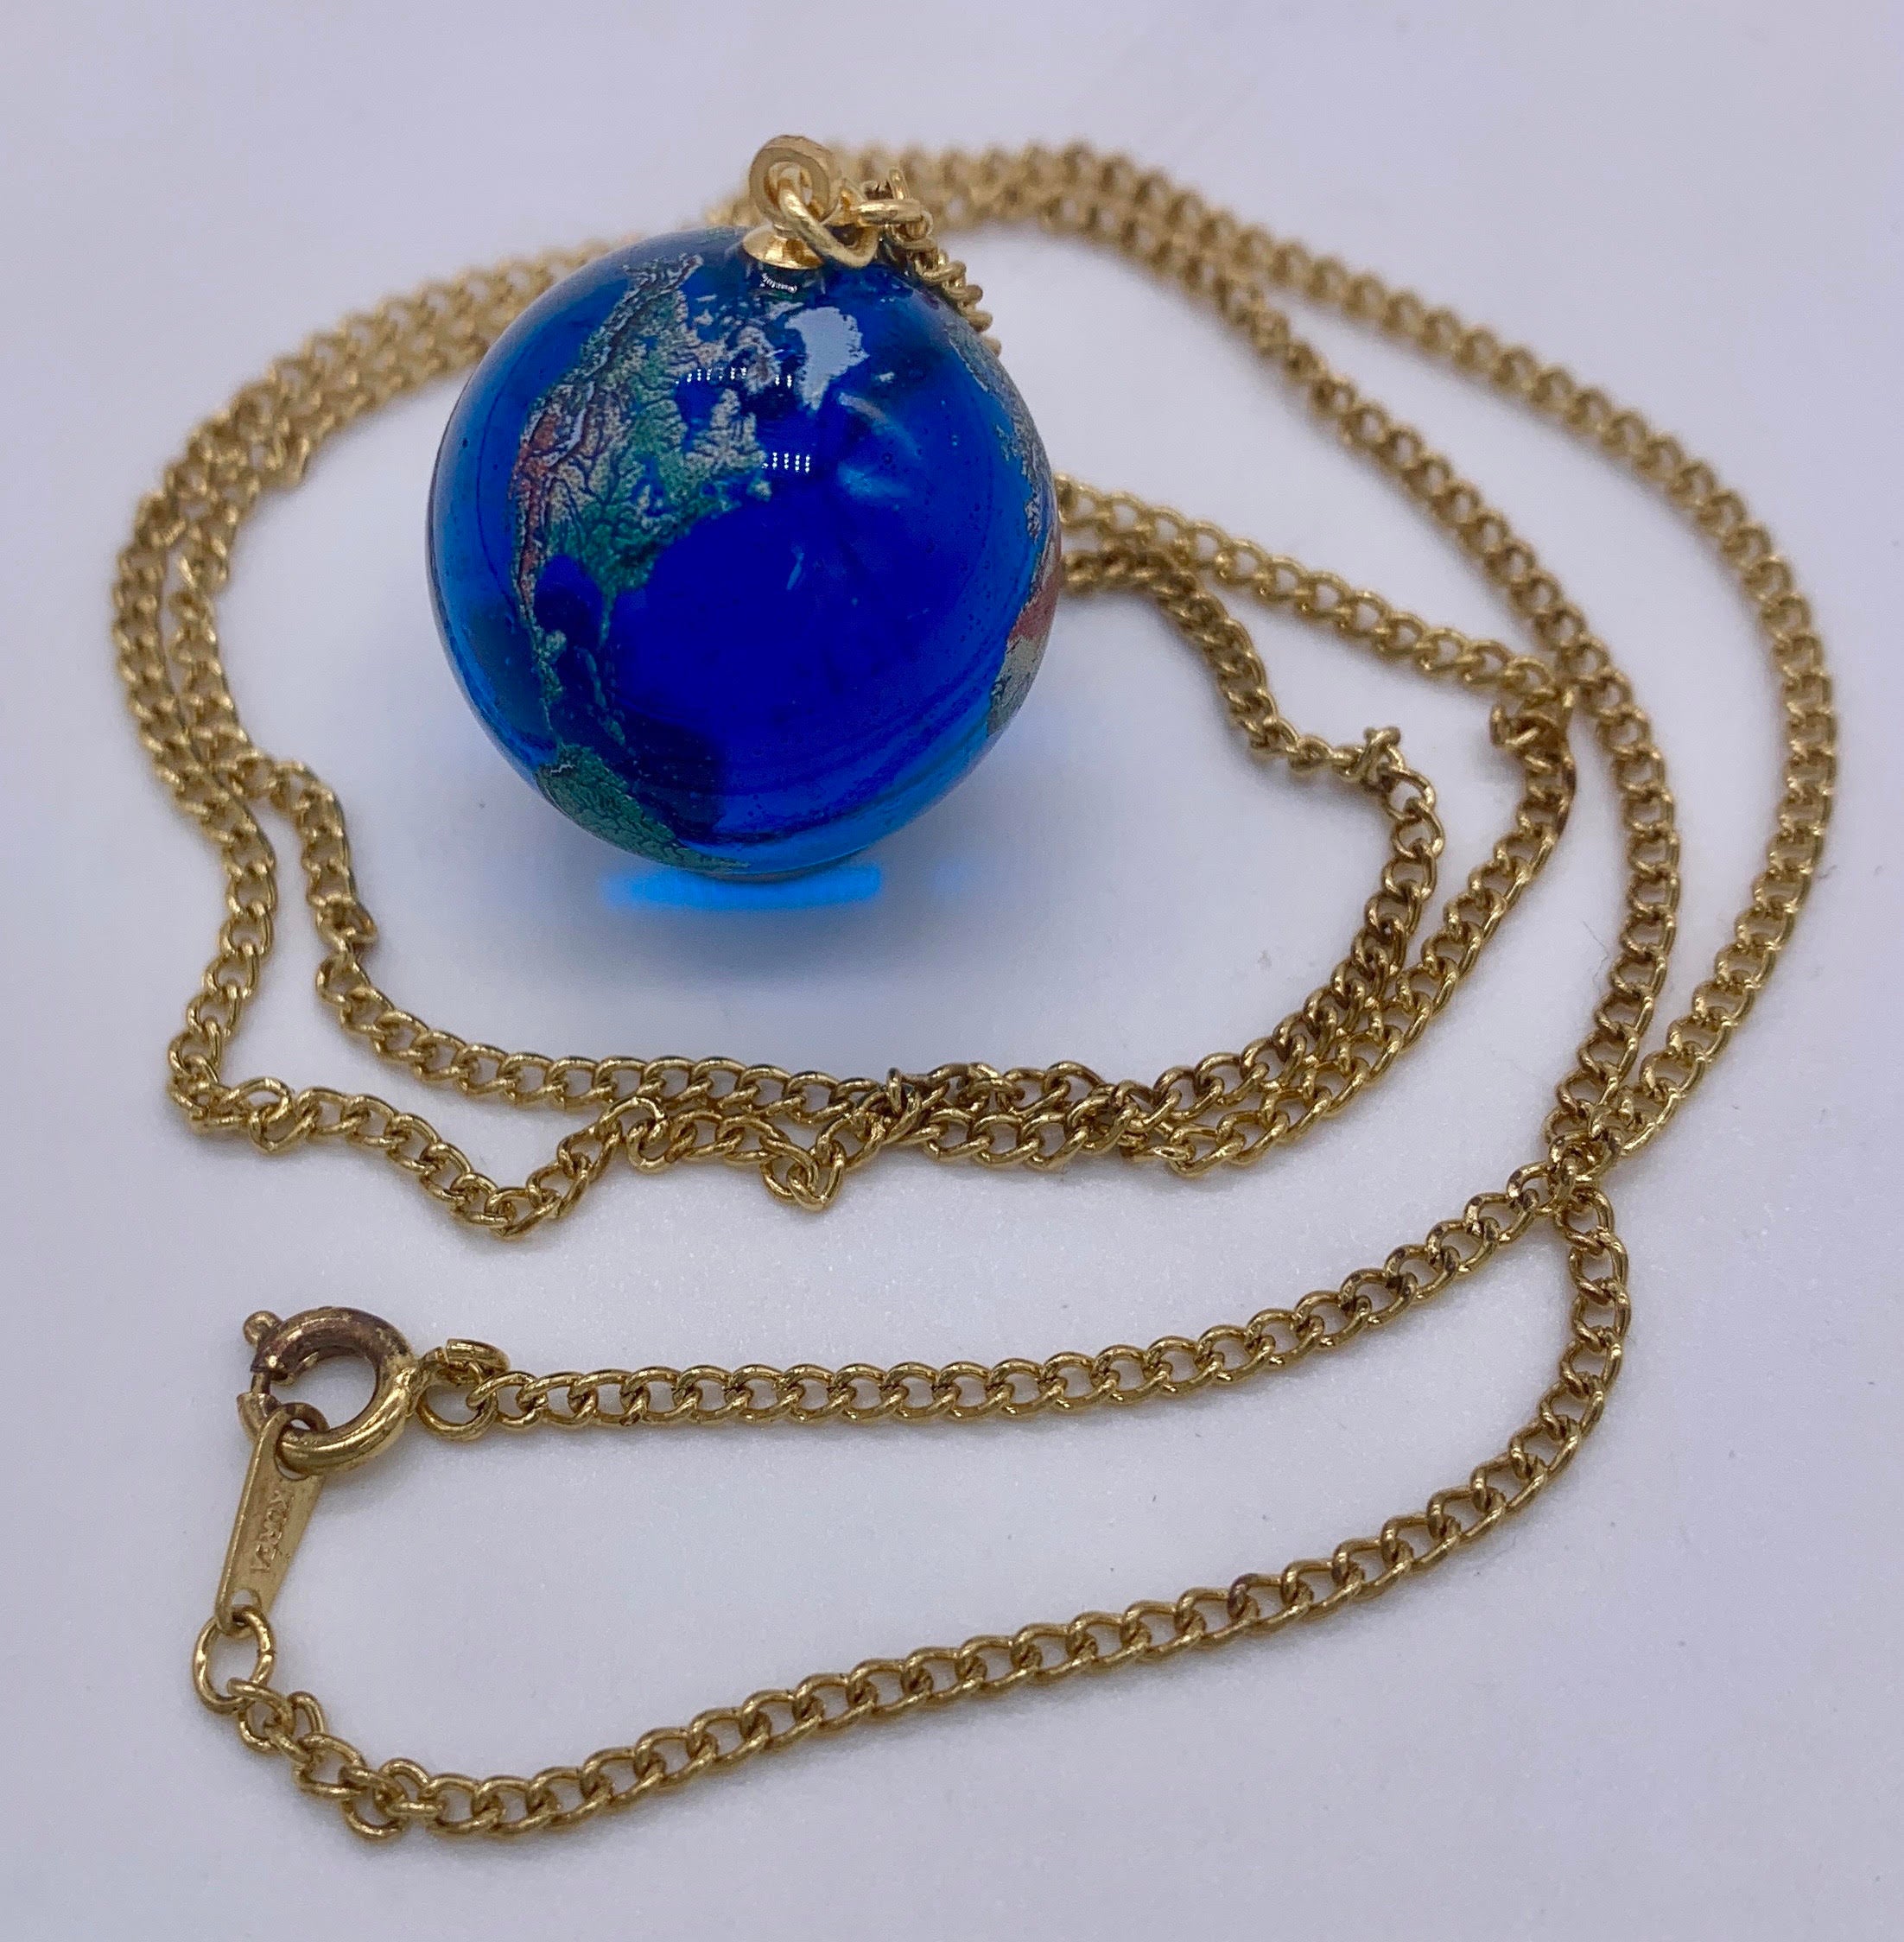 Planet Earth Art Collection + FREE Gold Fill Chain Necklace